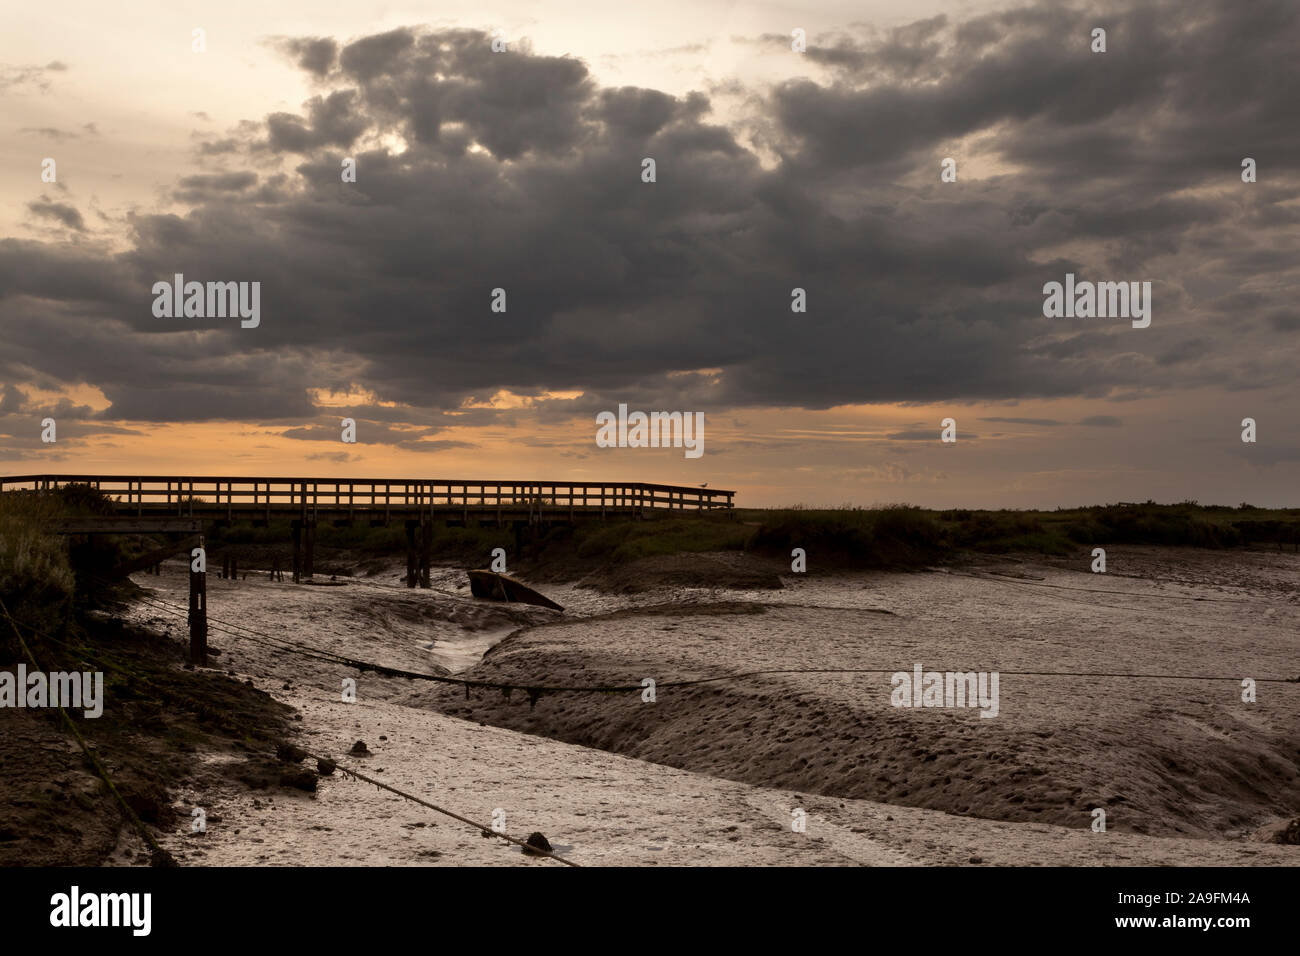 An atmospheric moody salt marsh at low tide with a foot bridge crossing a muddy dyke Stock Photo